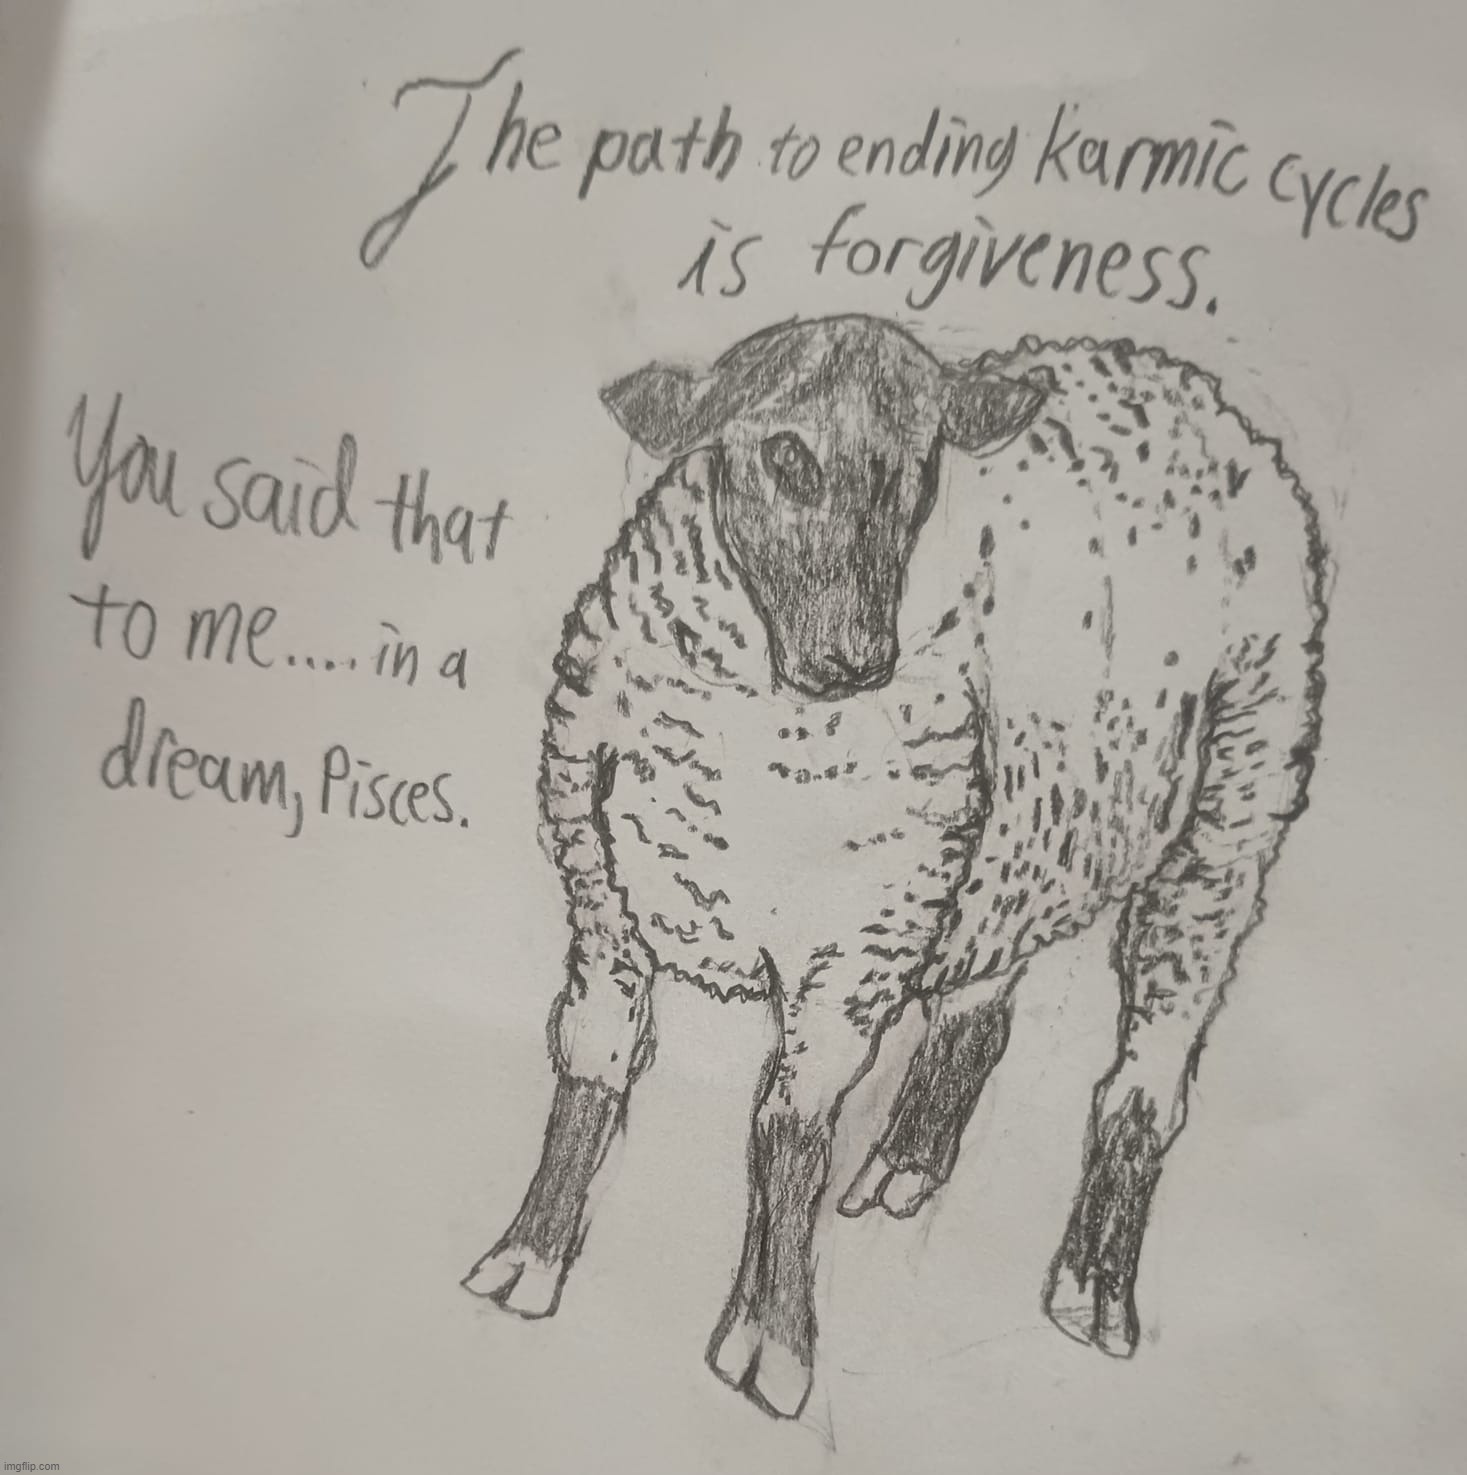 A friend of mine told me something he heard in a dream. He said the person who gave him the advice in the dream was...me. | image tagged in zodiac,sheep,karma,forgiveness,dream,drawing | made w/ Imgflip meme maker